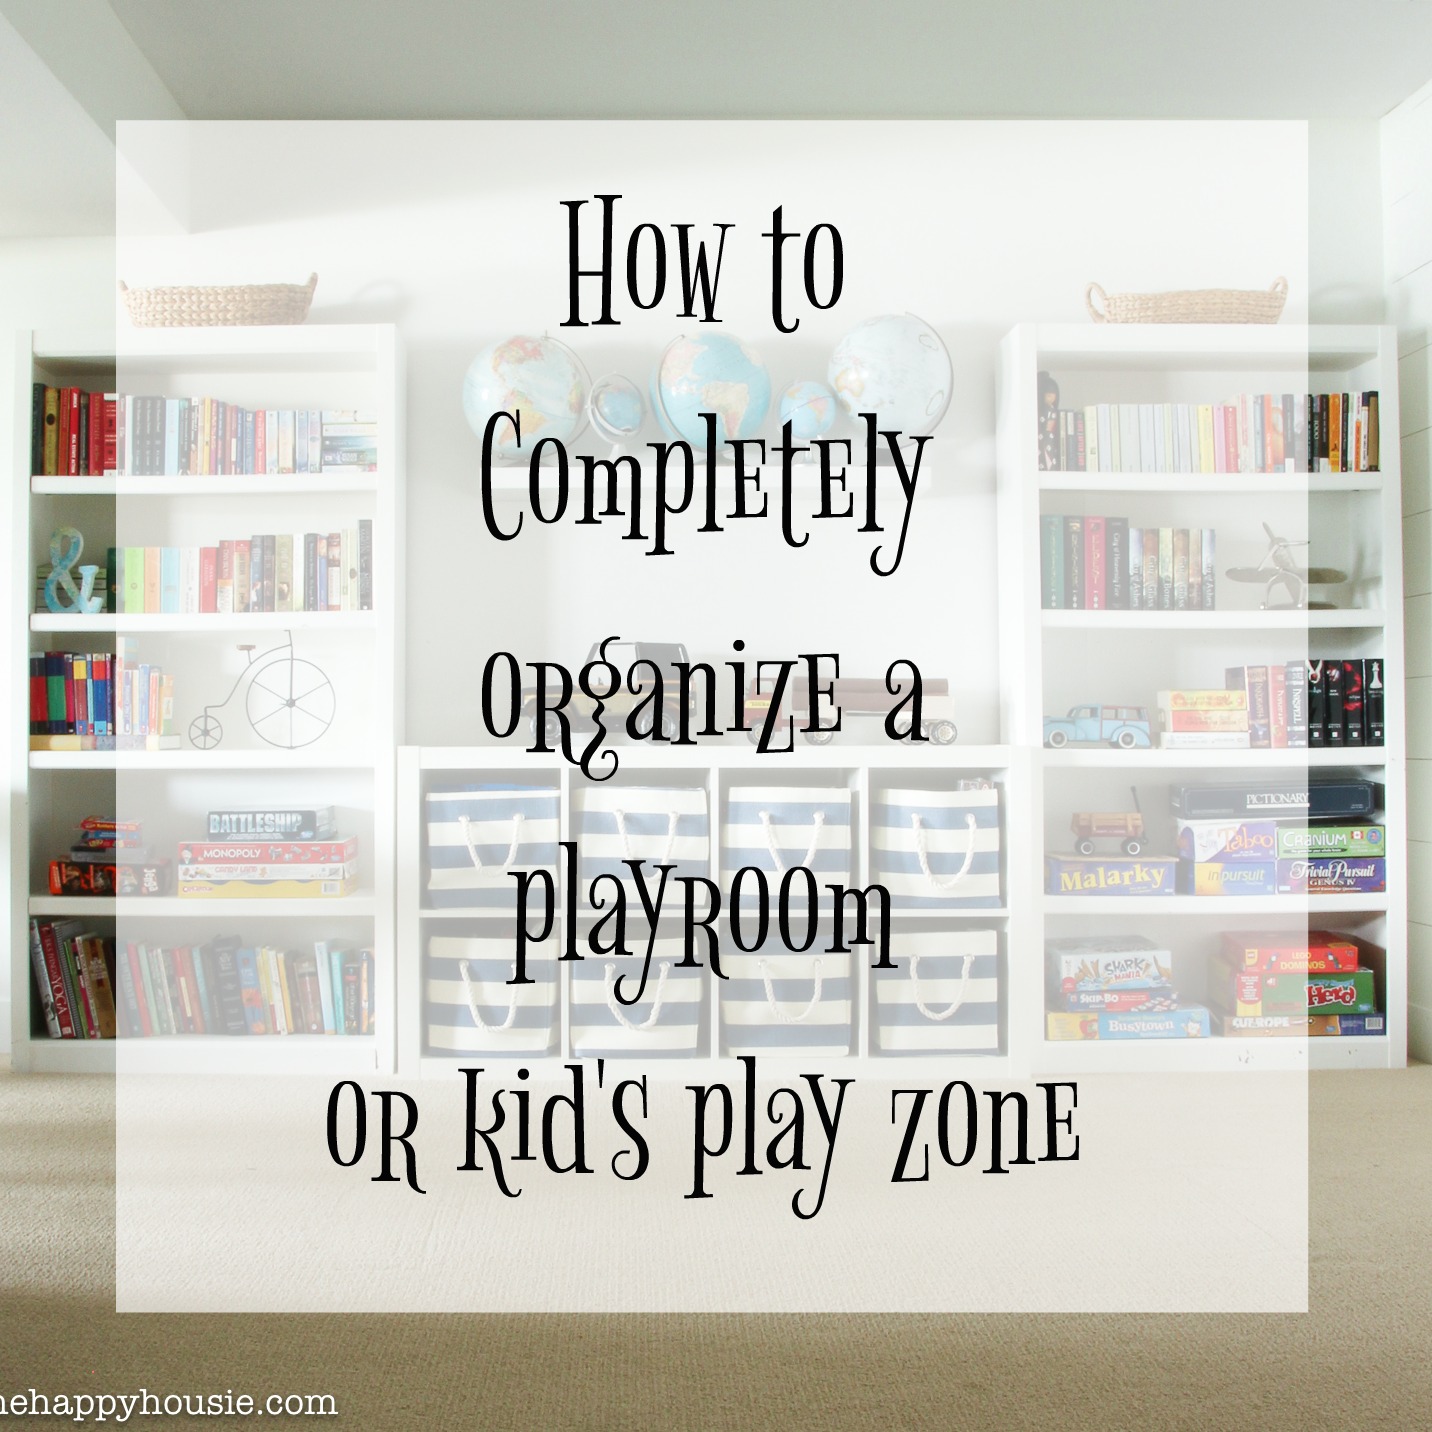 https://www.thehappyhousie.com/wp-content/uploads/2017/04/How-to-completely-organize-a-playroom-or-kids-play-zone-featuring-Land-of-Nod-storage-bins-in-an-Ikea-Kallax.jpg